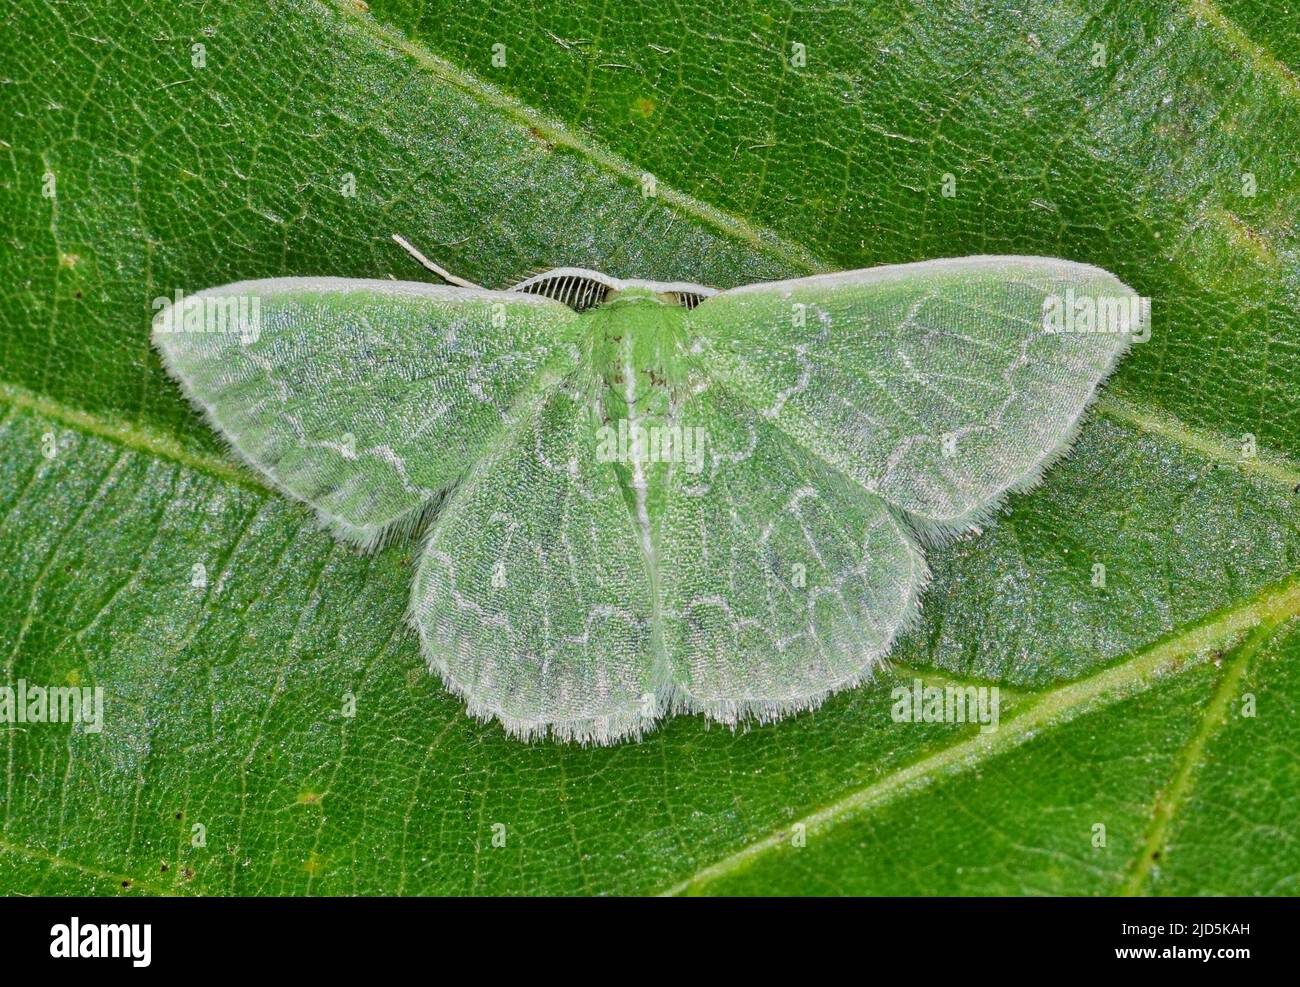 Southern Emerald Moth (Synchlora frondaria) displaying camouflage on an oak leaf, dorsal view. Common species throughout the USA. Stock Photo